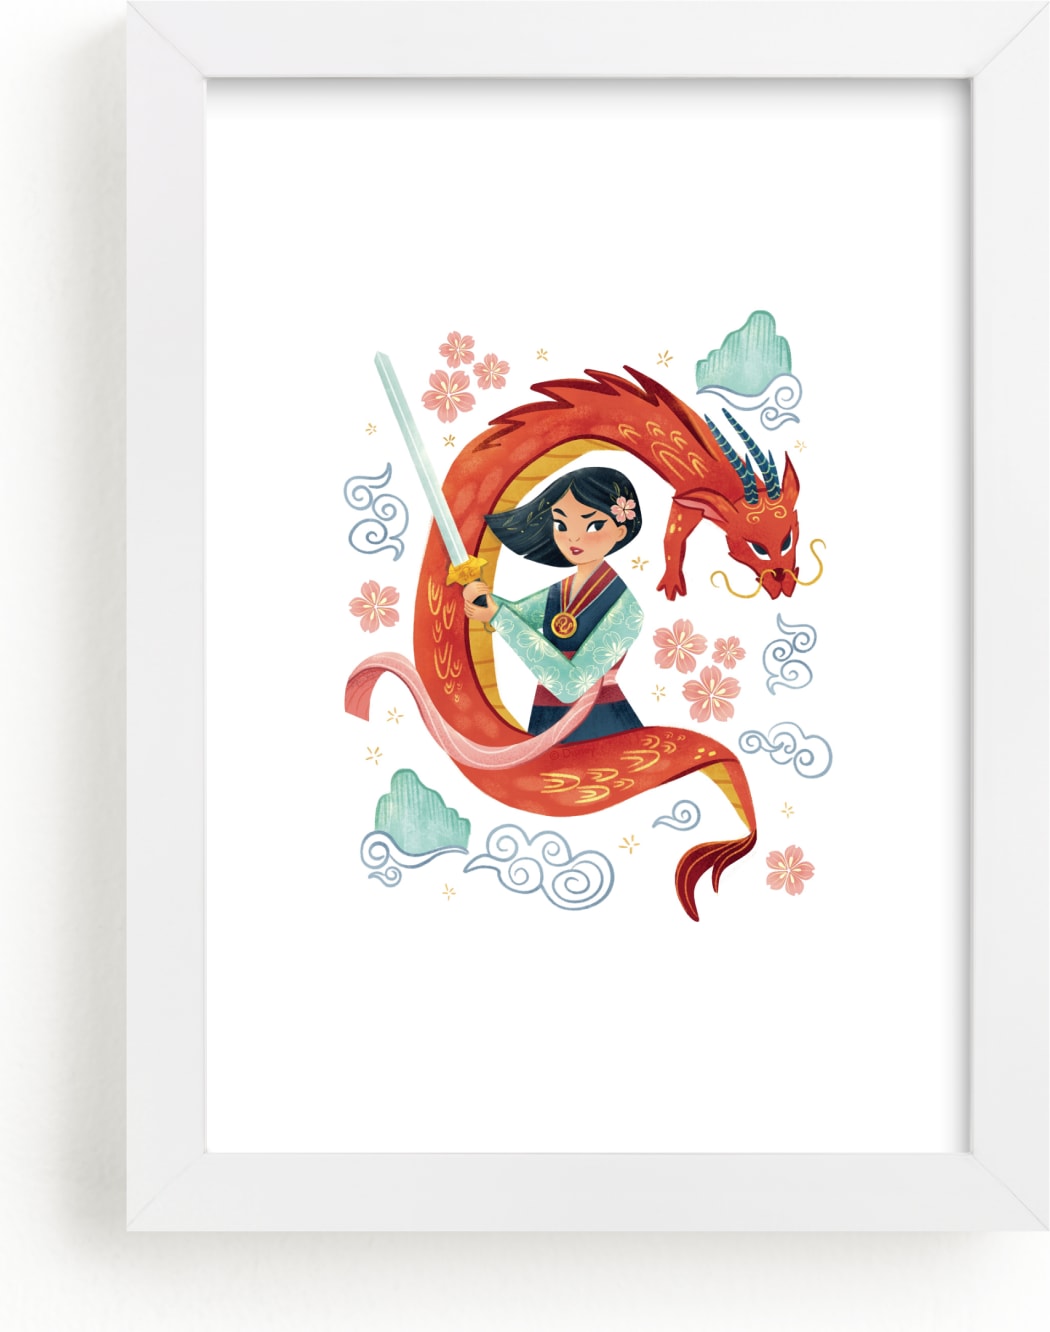 This is a colorful disney art by curiouszhi called Disney's Warrior Princess Mulan.